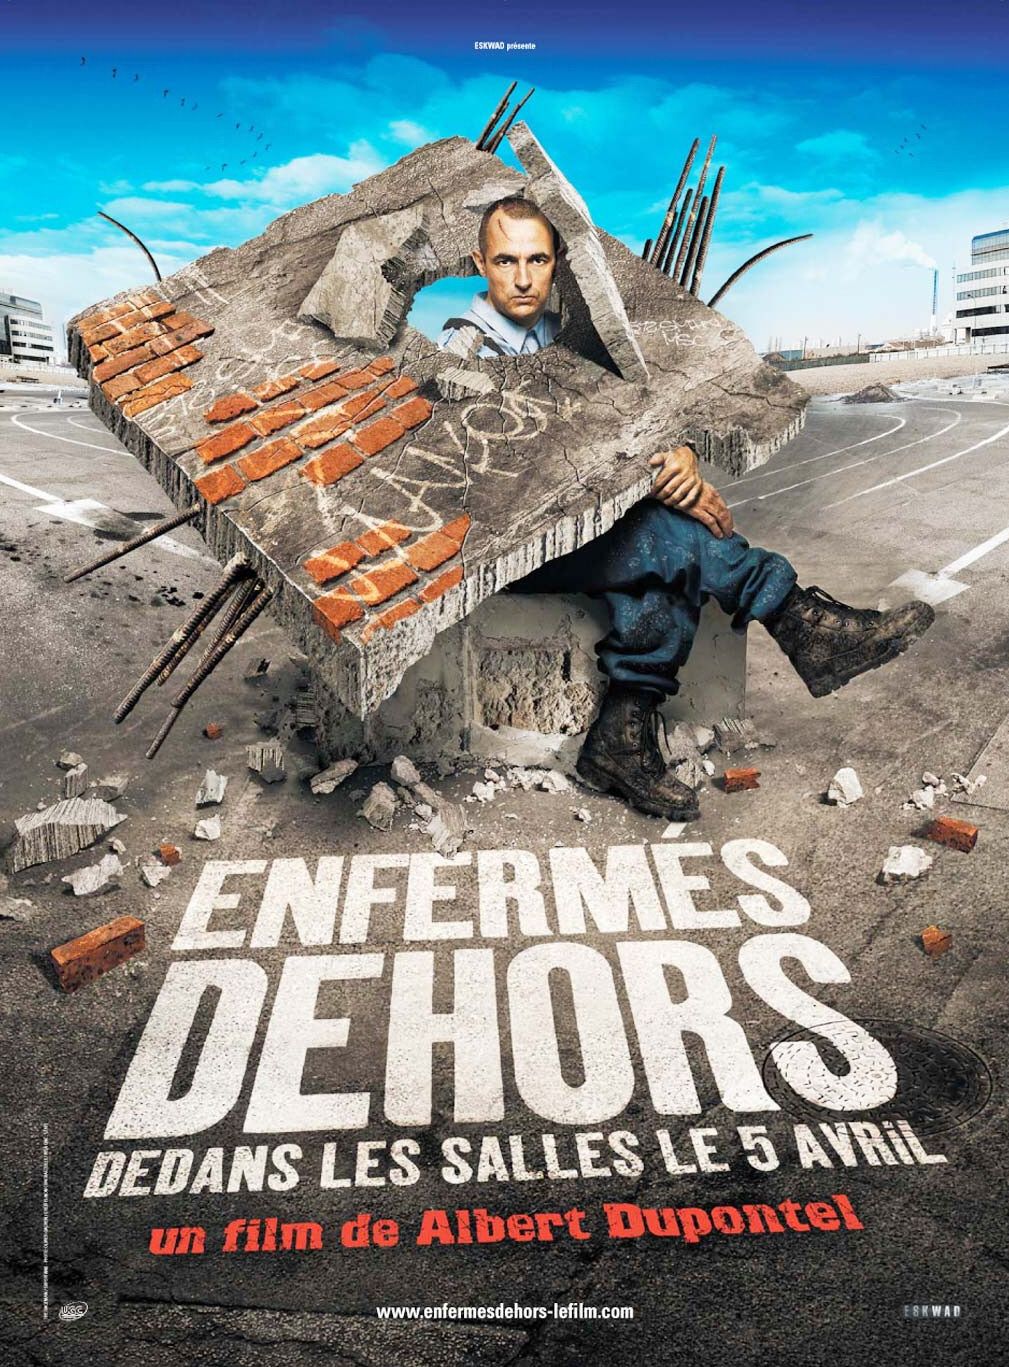 Extra Large Movie Poster Image for Enfermés dehors 